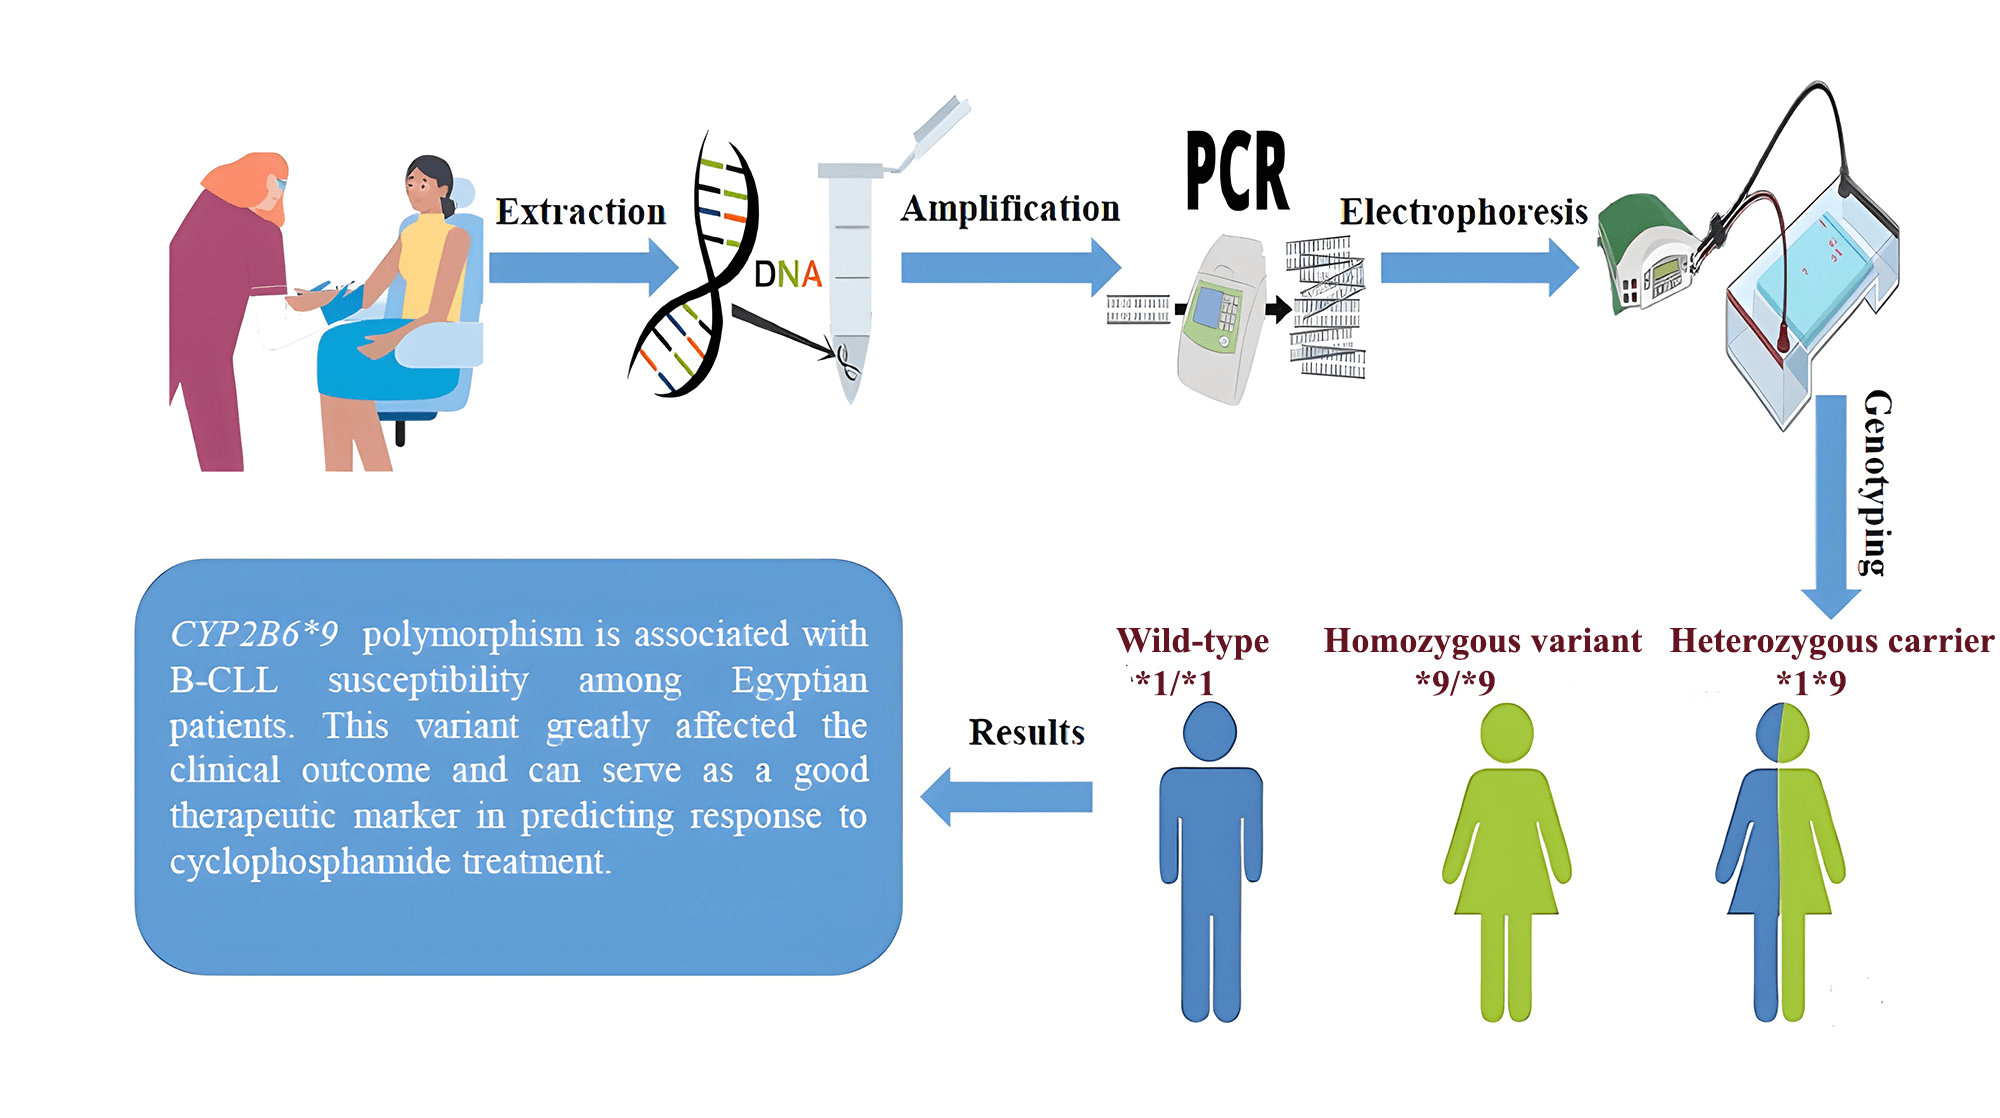 The role of polymorphic cytochrome P450 gene (CYP2B6) in B-chronic lymphocytic leukemia (B-CLL) incidence and outcome among Egyptian patients